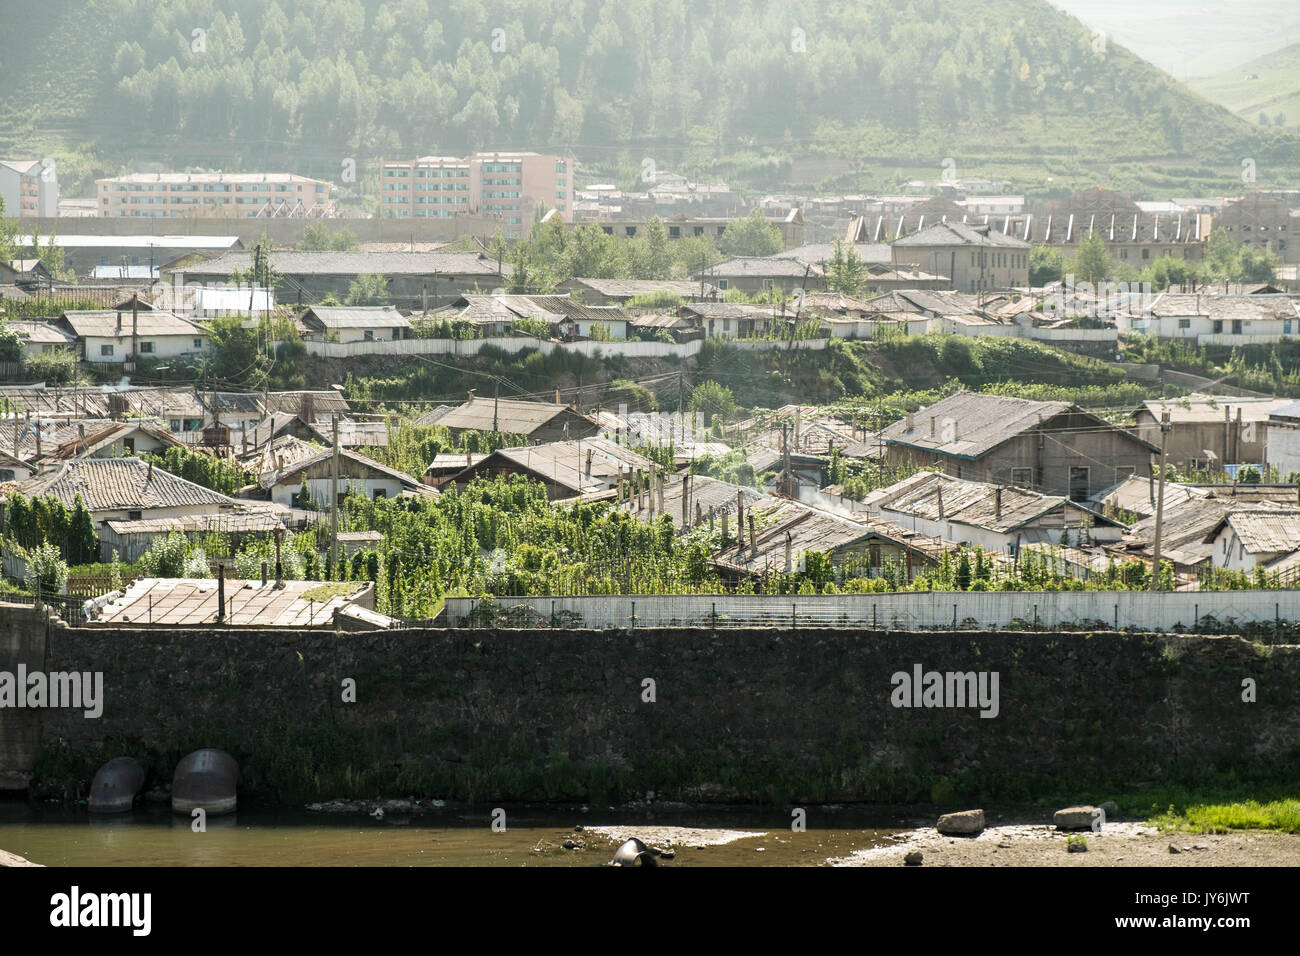 Hyesan, Ryanggang province, North Korea – August 5, 2017: The city has a population of approximately 200.000 and is set on the bank of the Yalu river Stock Photo